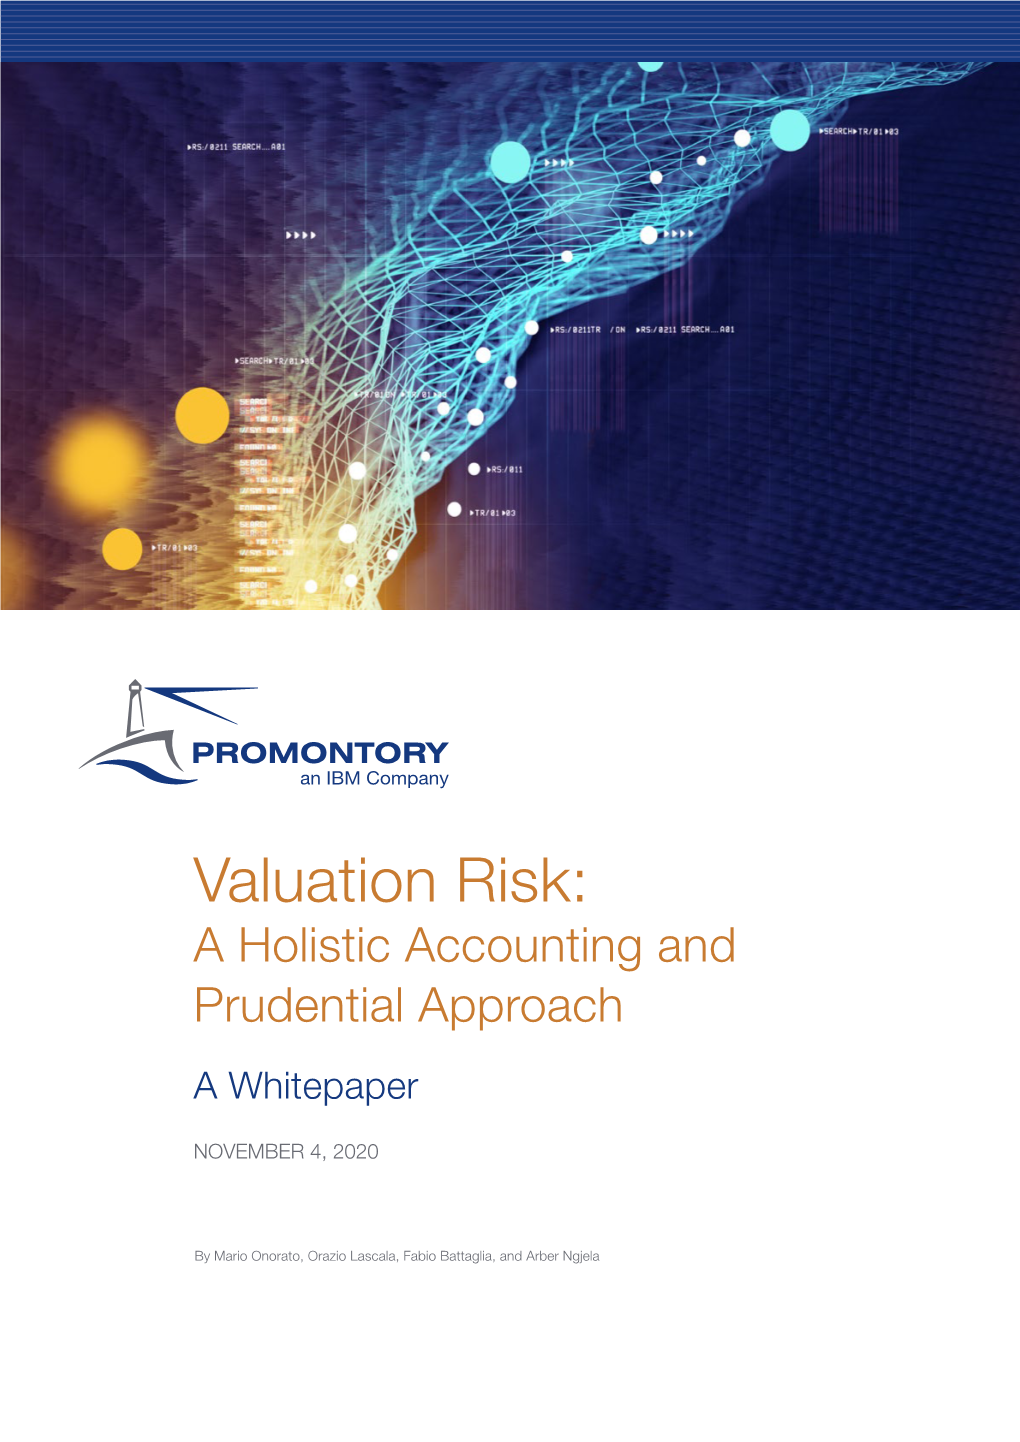 Valuation Risk: a Holistic Accounting and Prudential Approach a Whitepaper